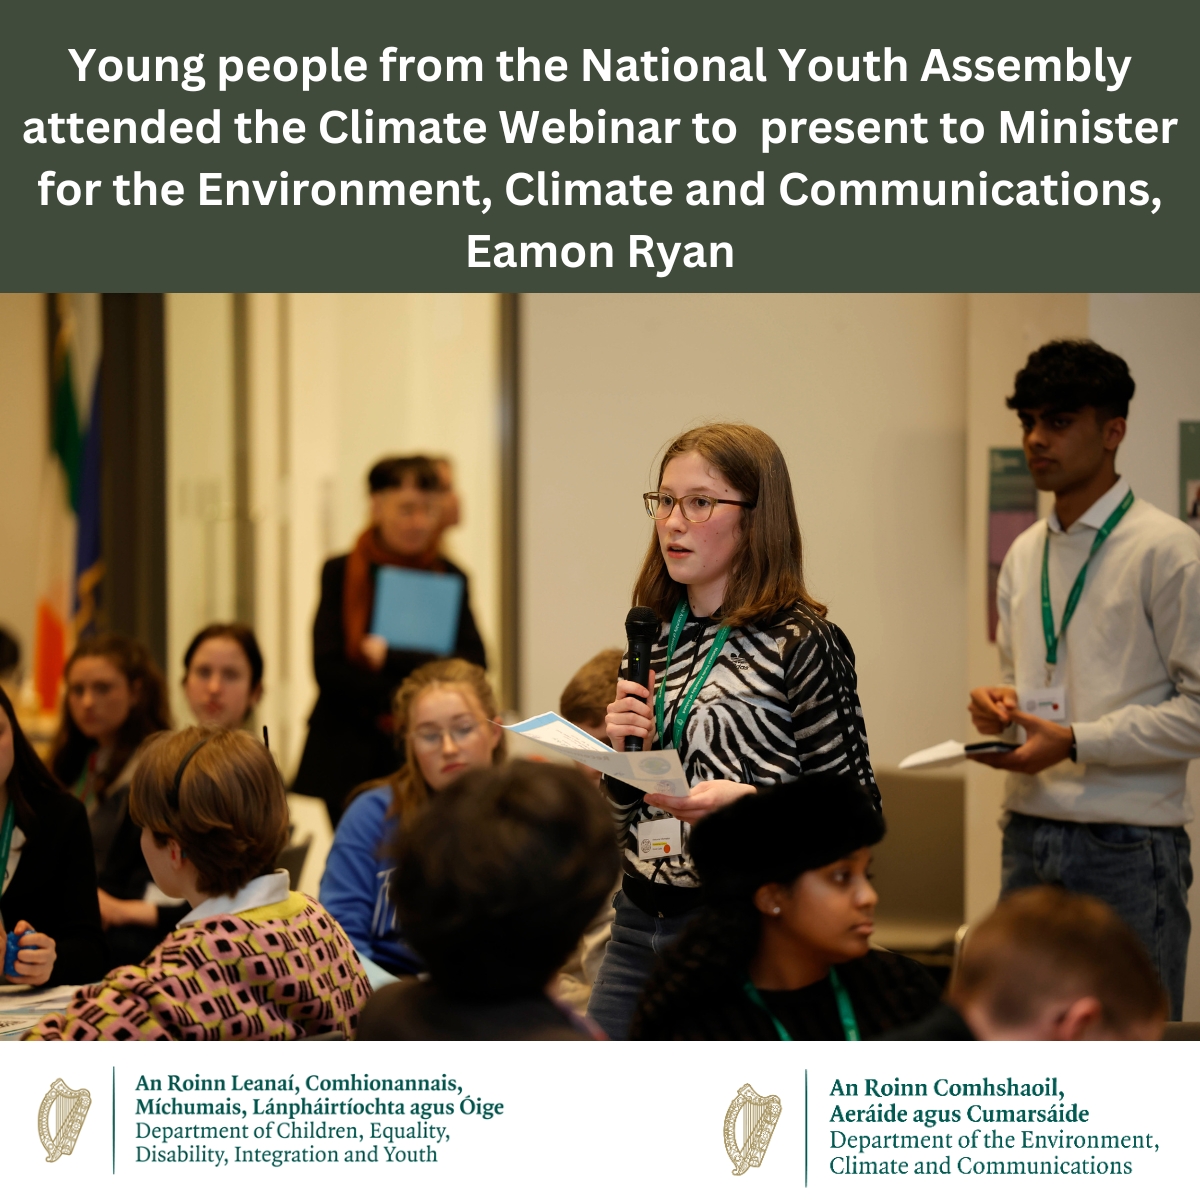 Young people from across Ireland attended the National Youth Assembly on Climate Webinar to make recommendations directly to Minister Ryan on the #ClimateActionPlan and have their voices heard on #ClimateActionIRL #YouthAssemblyIRL